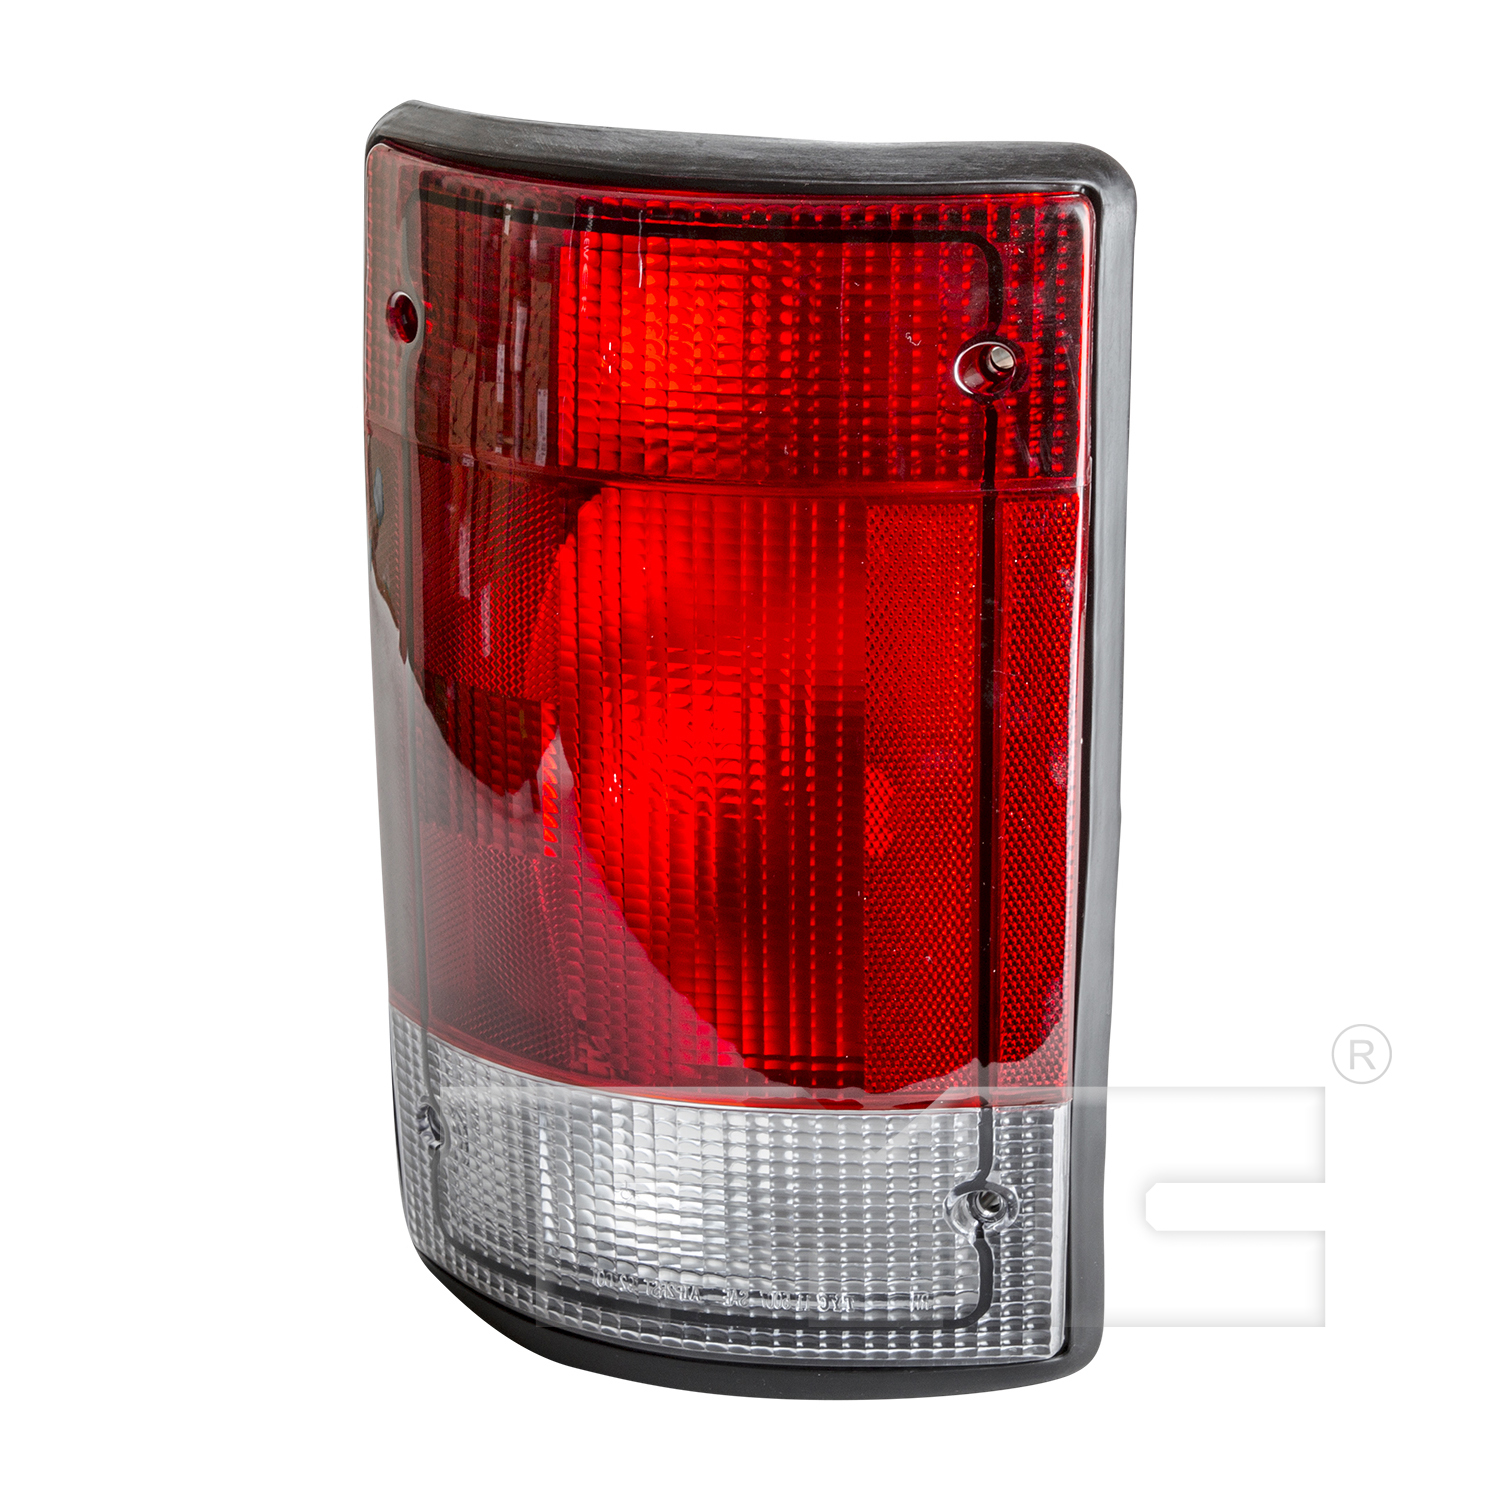 Aftermarket TAILLIGHTS for FORD - E-450 SUPER DUTY, E-450 SUPER DUTY,03-03,LT Taillamp assy